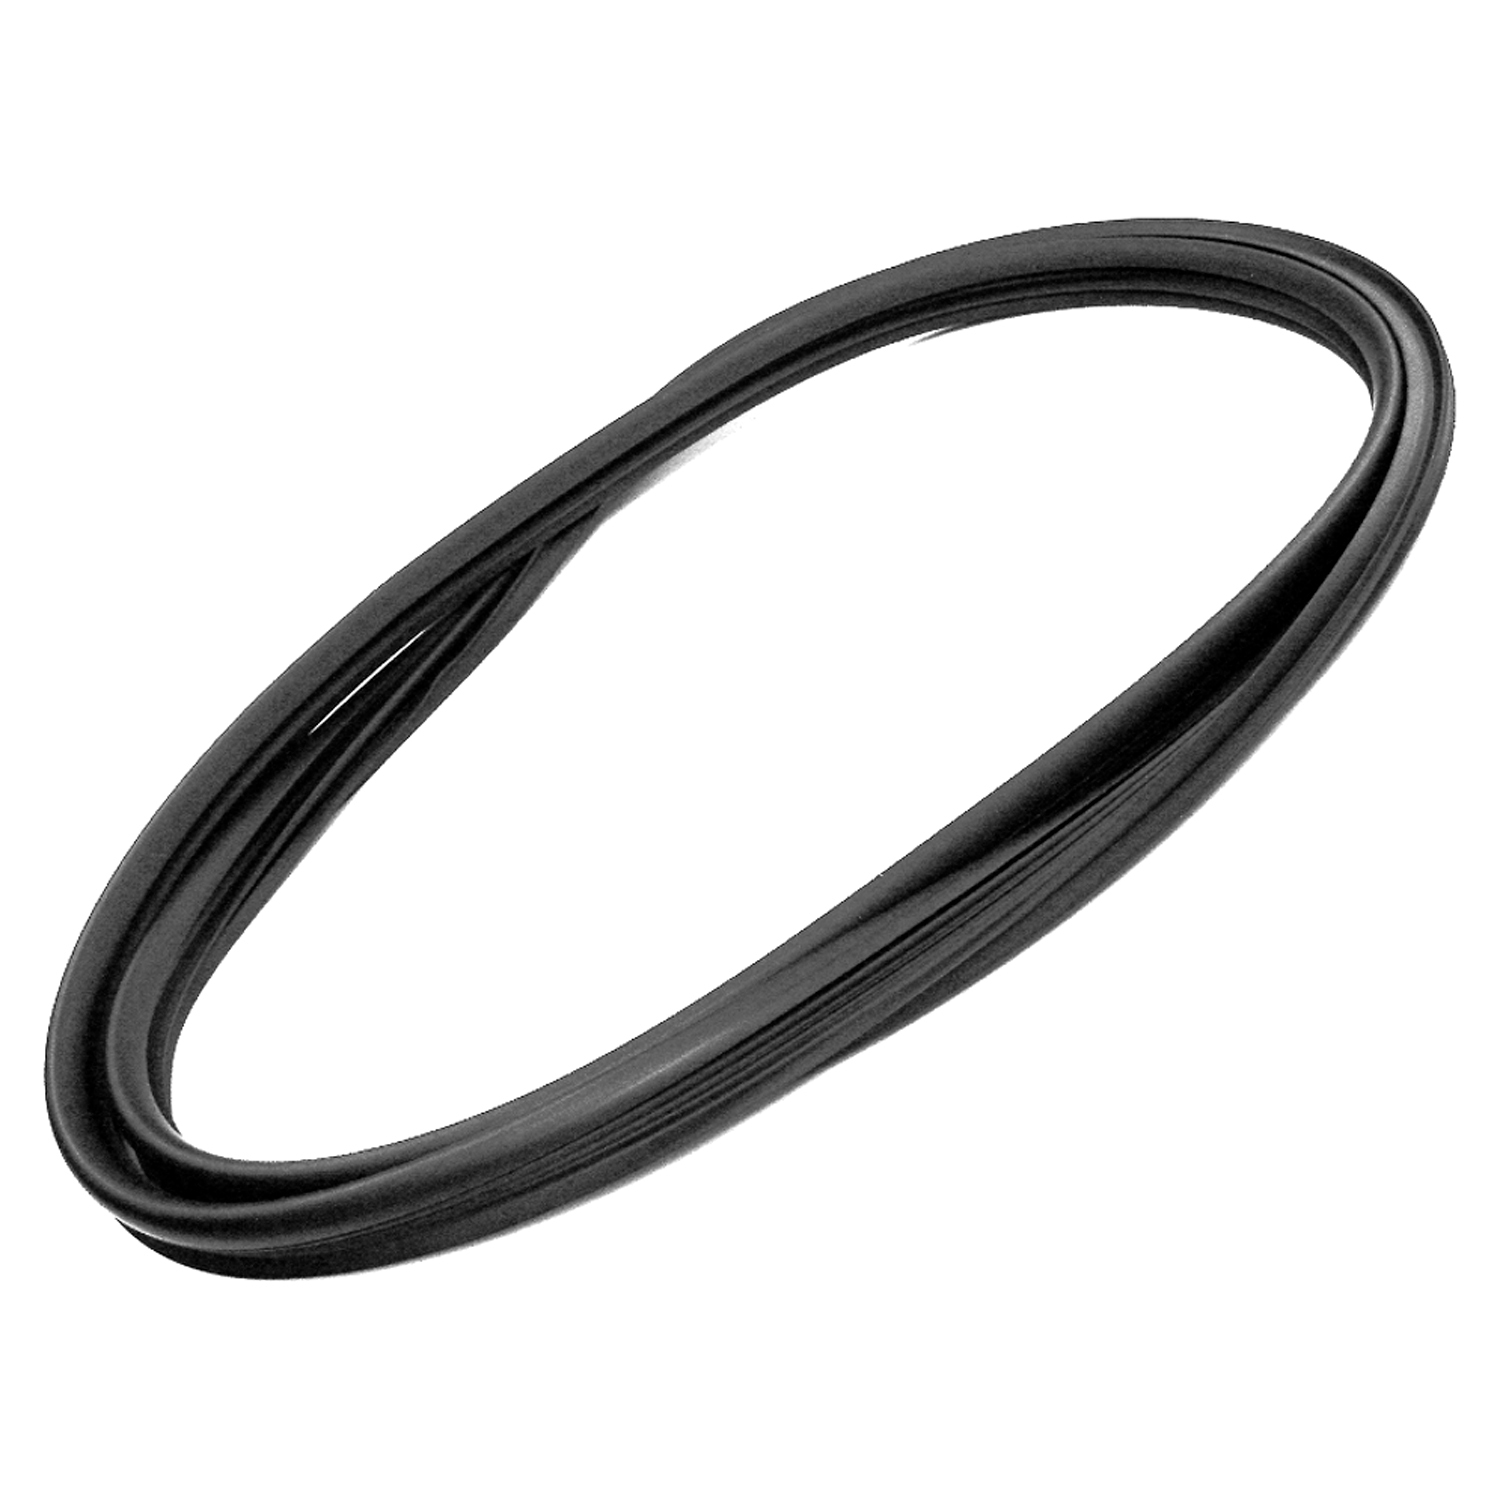 1988 Chevrolet Blazer Windshield Seal, 73-87 GM Full Size Truck, 73-91 GM SUV, Without Trim Groove-VWS 7313-D